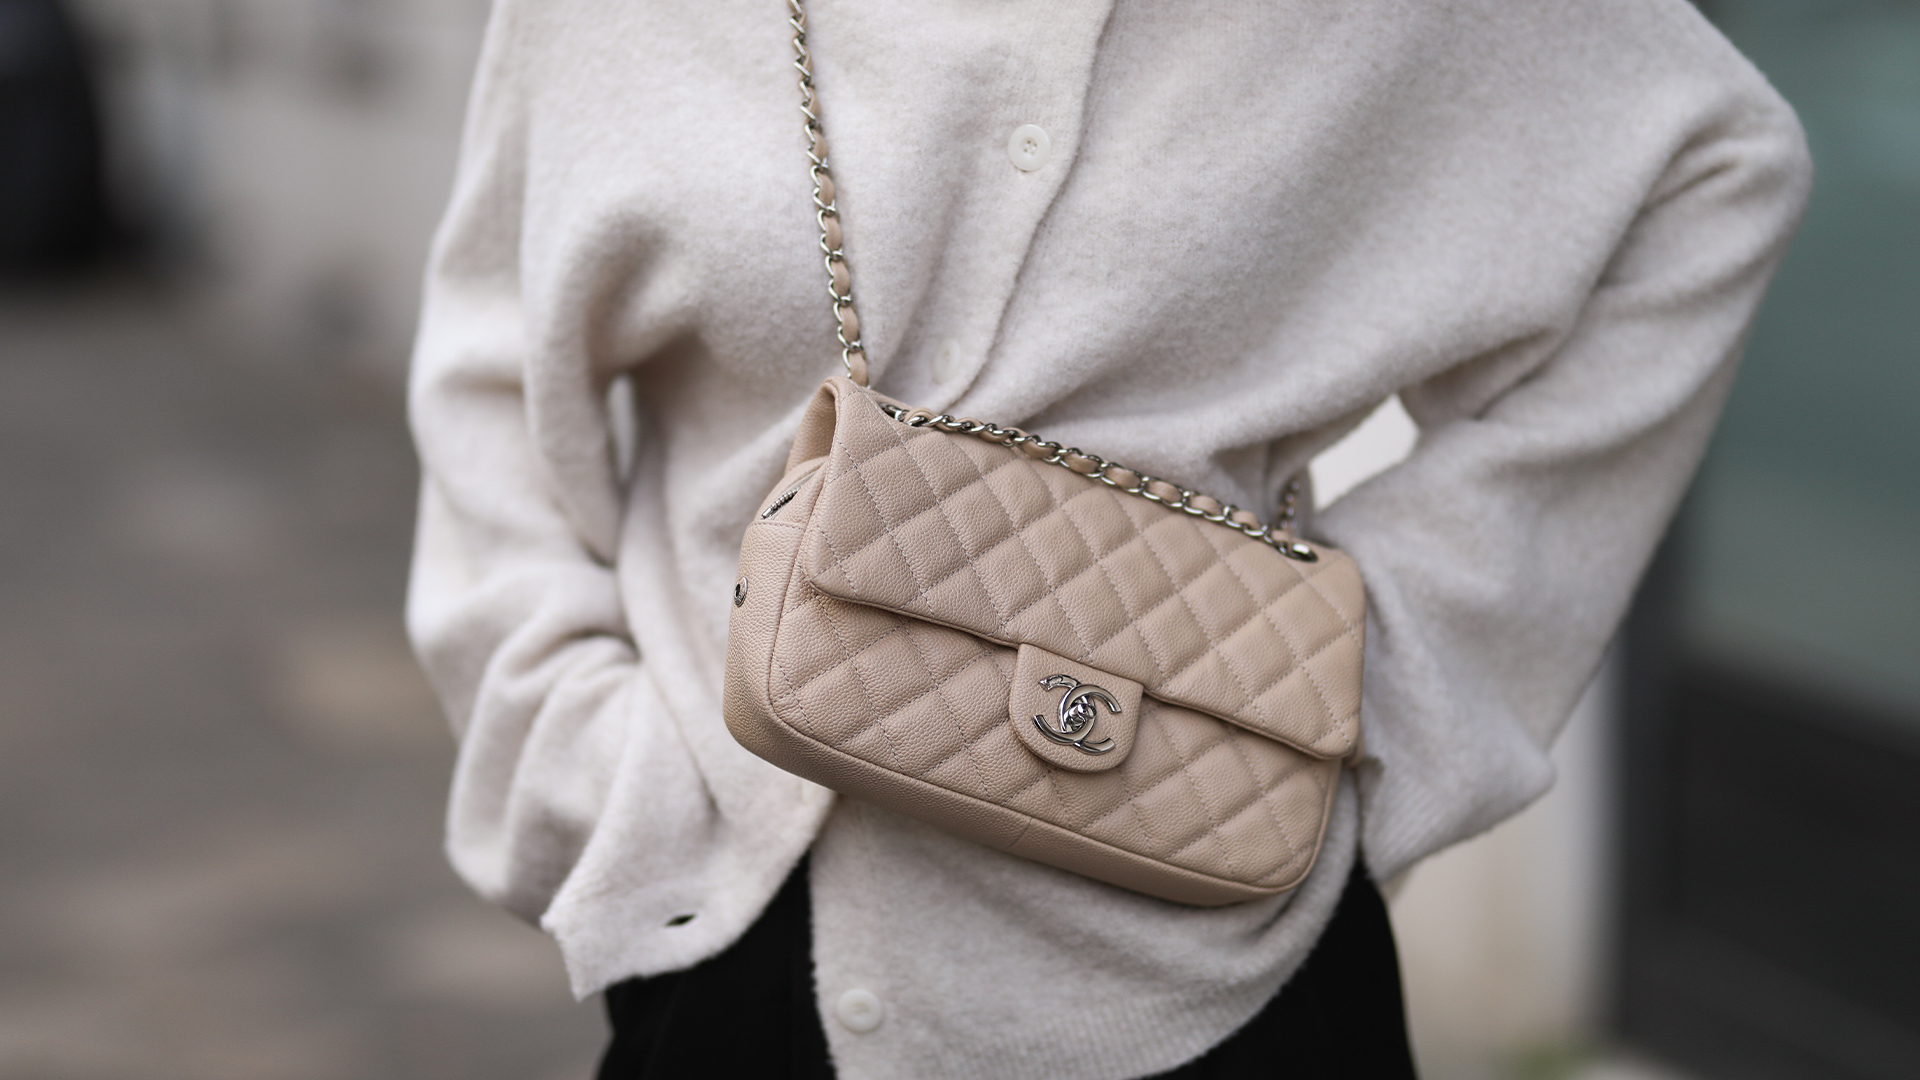 Everything You Need To Know About Luxury Handbag Rental Services